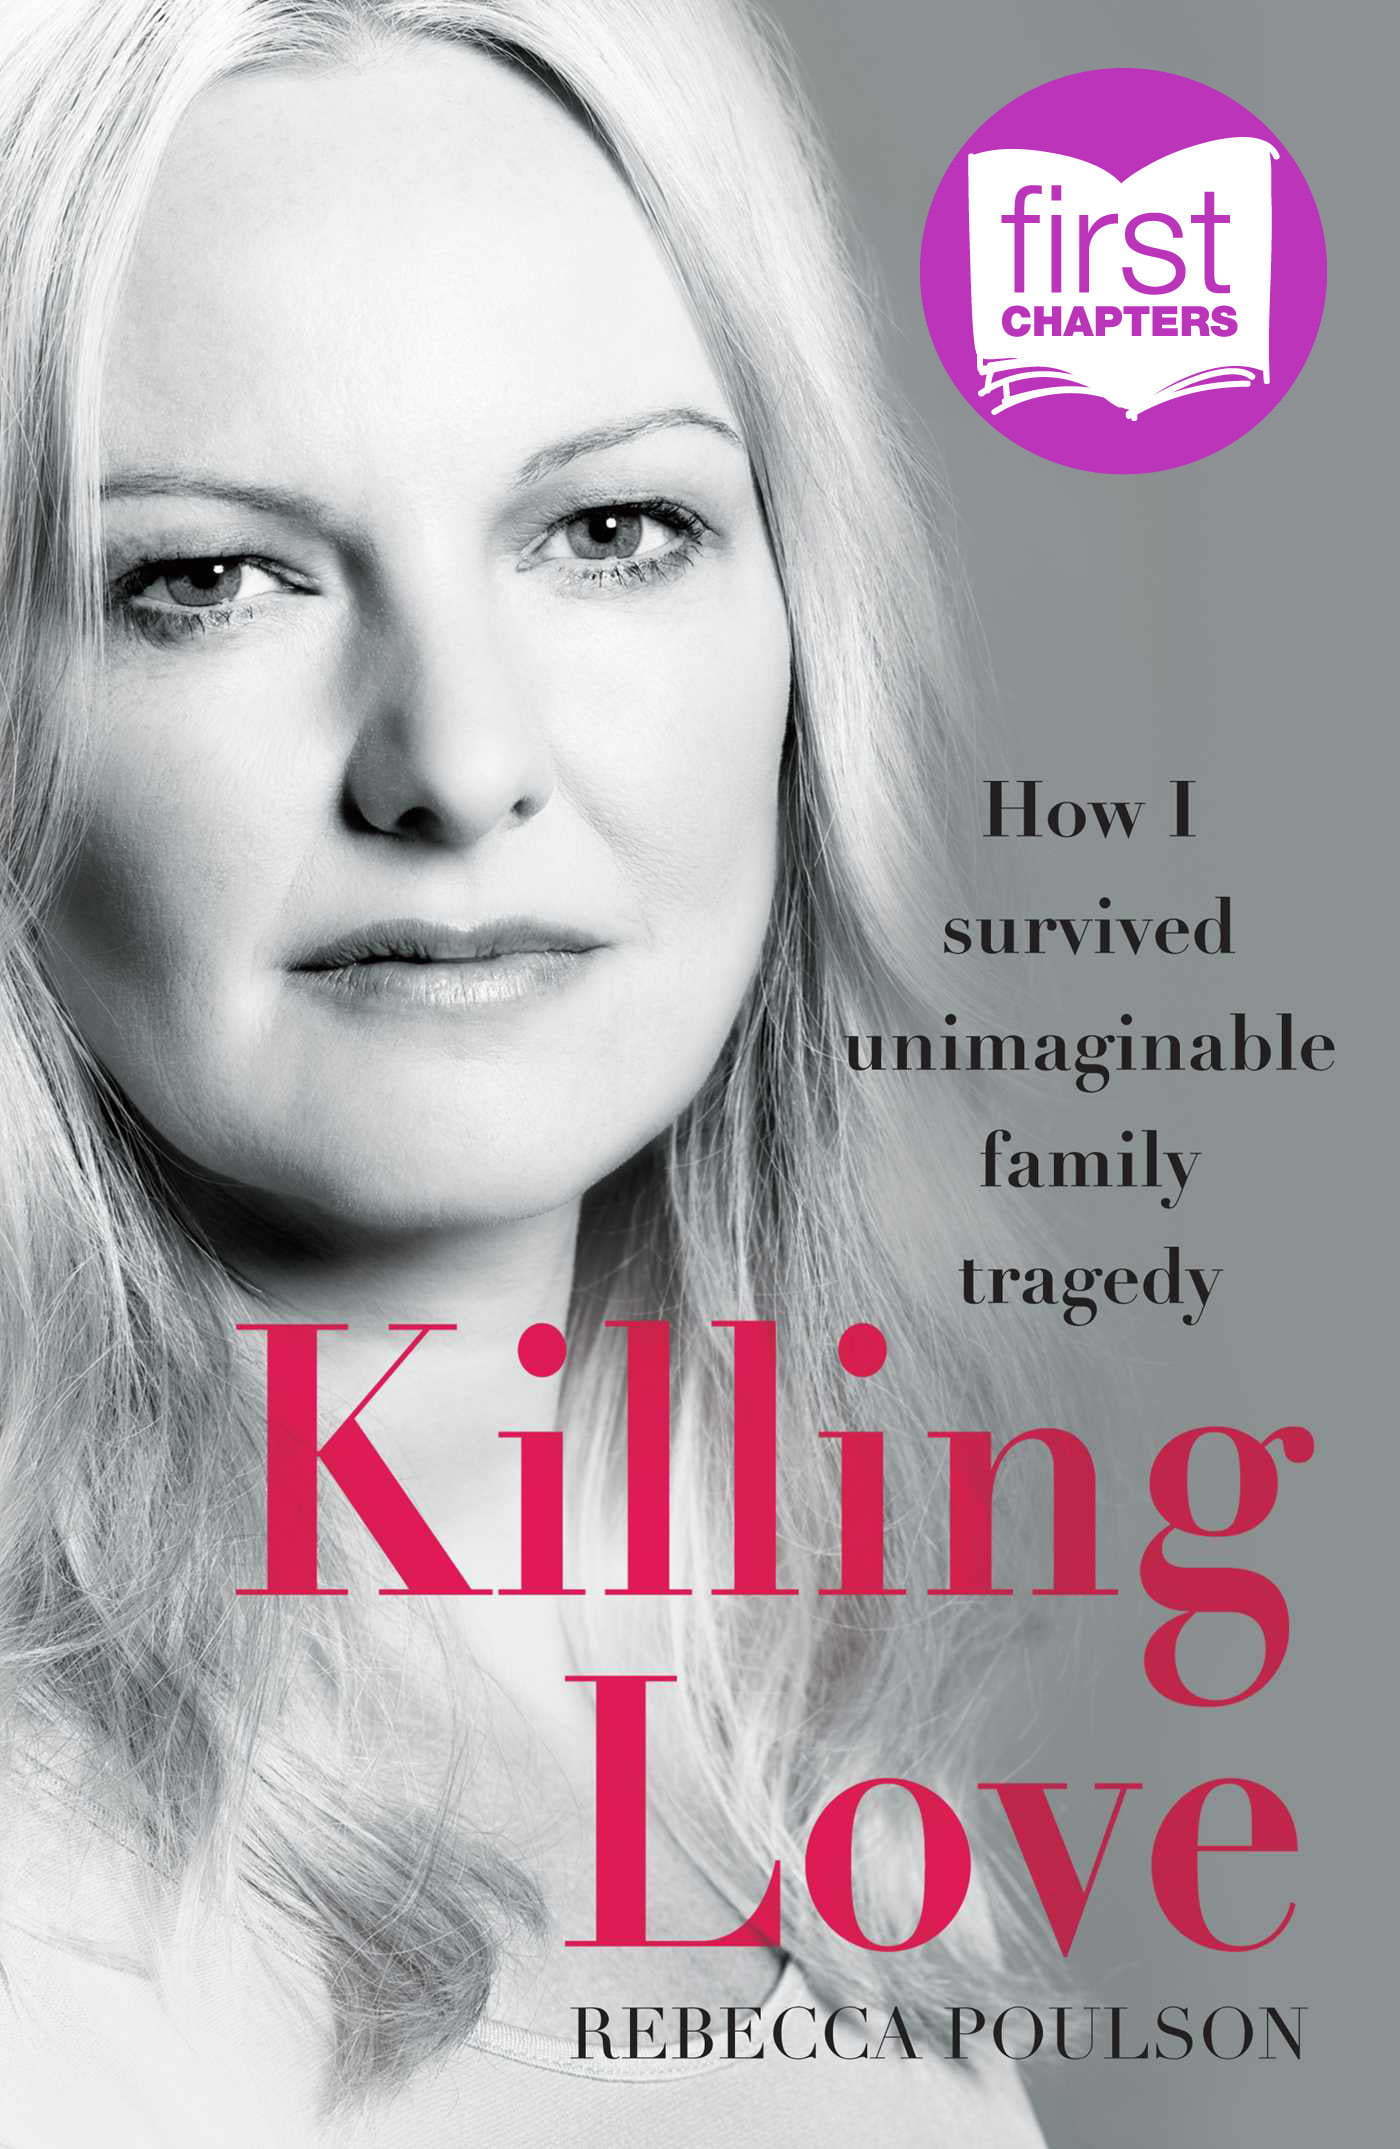 First Chapters: Free Book Extract of Killing Love by Rebecca Poulson